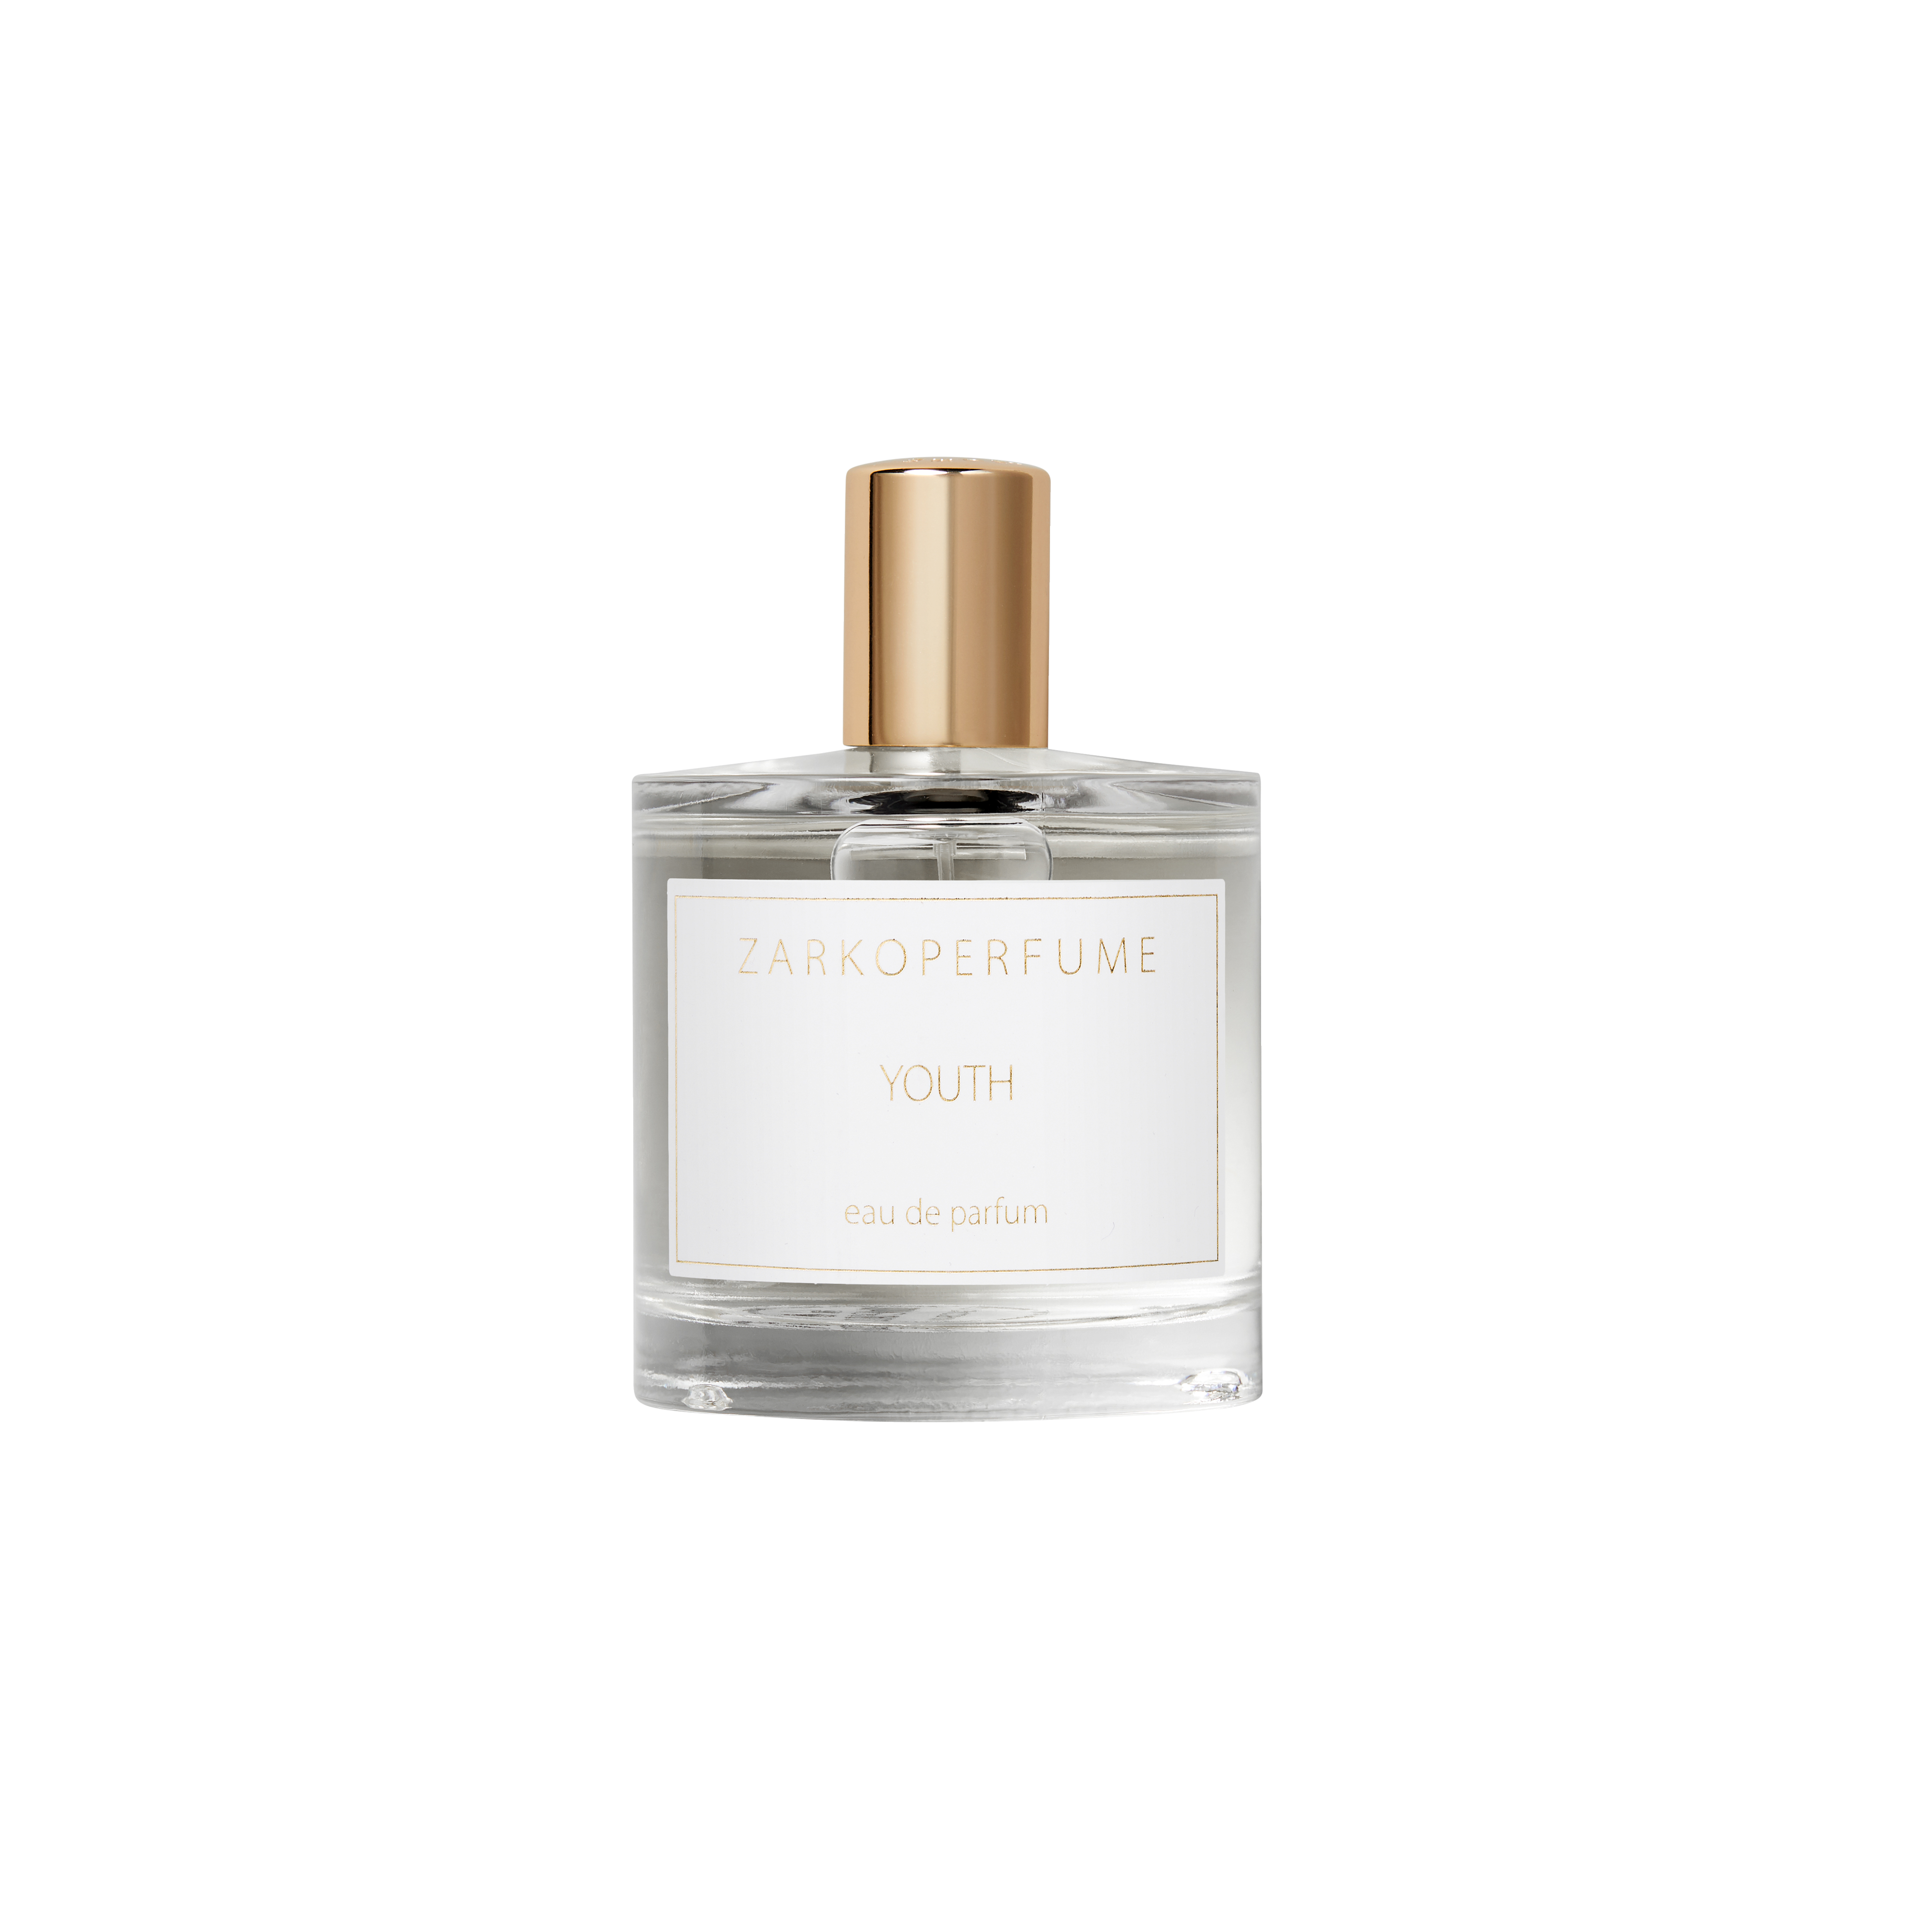 THE YOUTH 100ml